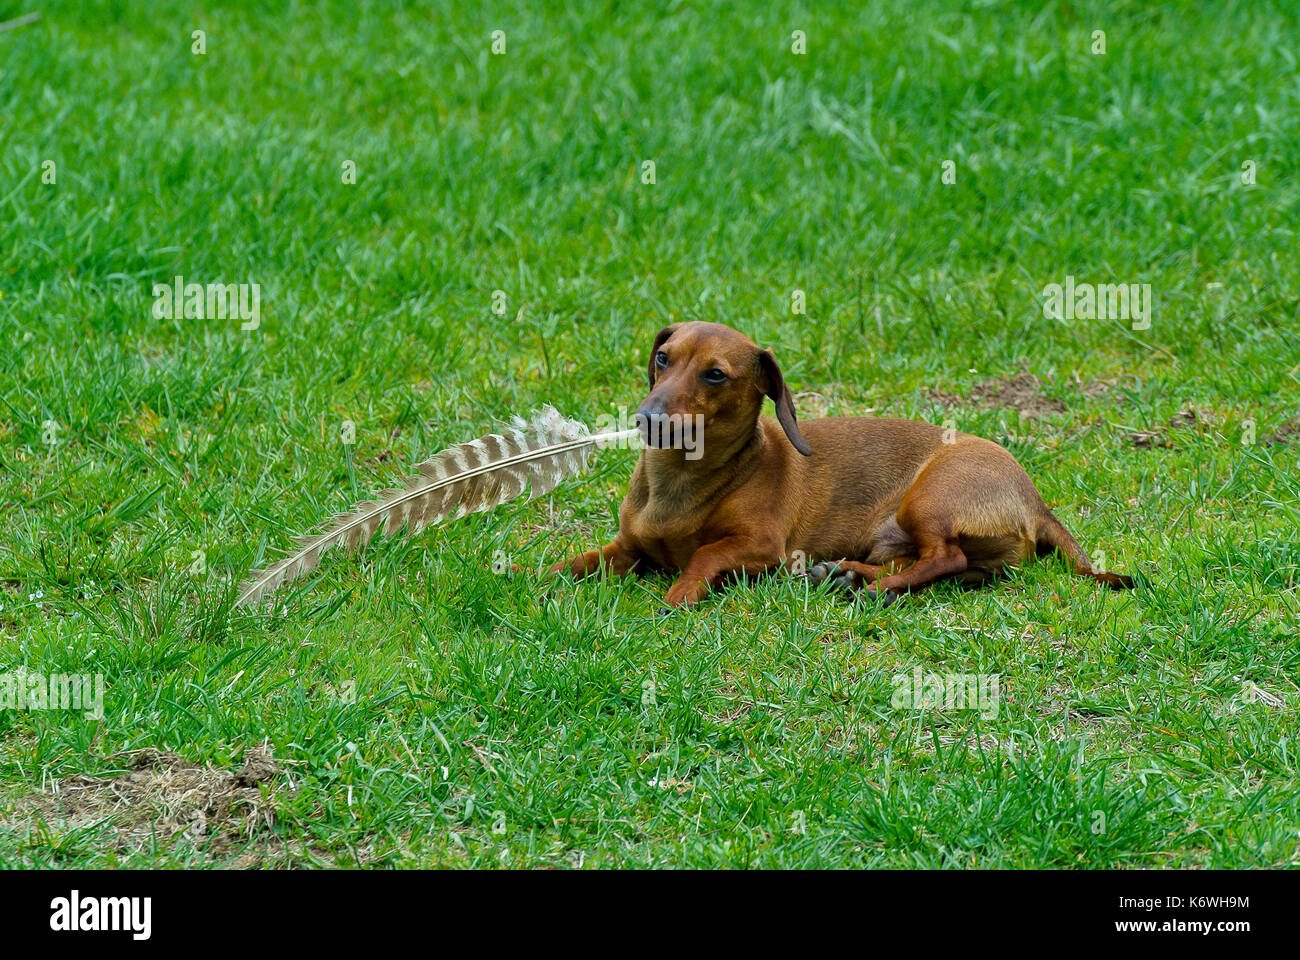 DACHSHUND PLAYING WITH BIRD FEATHER Stock Photo